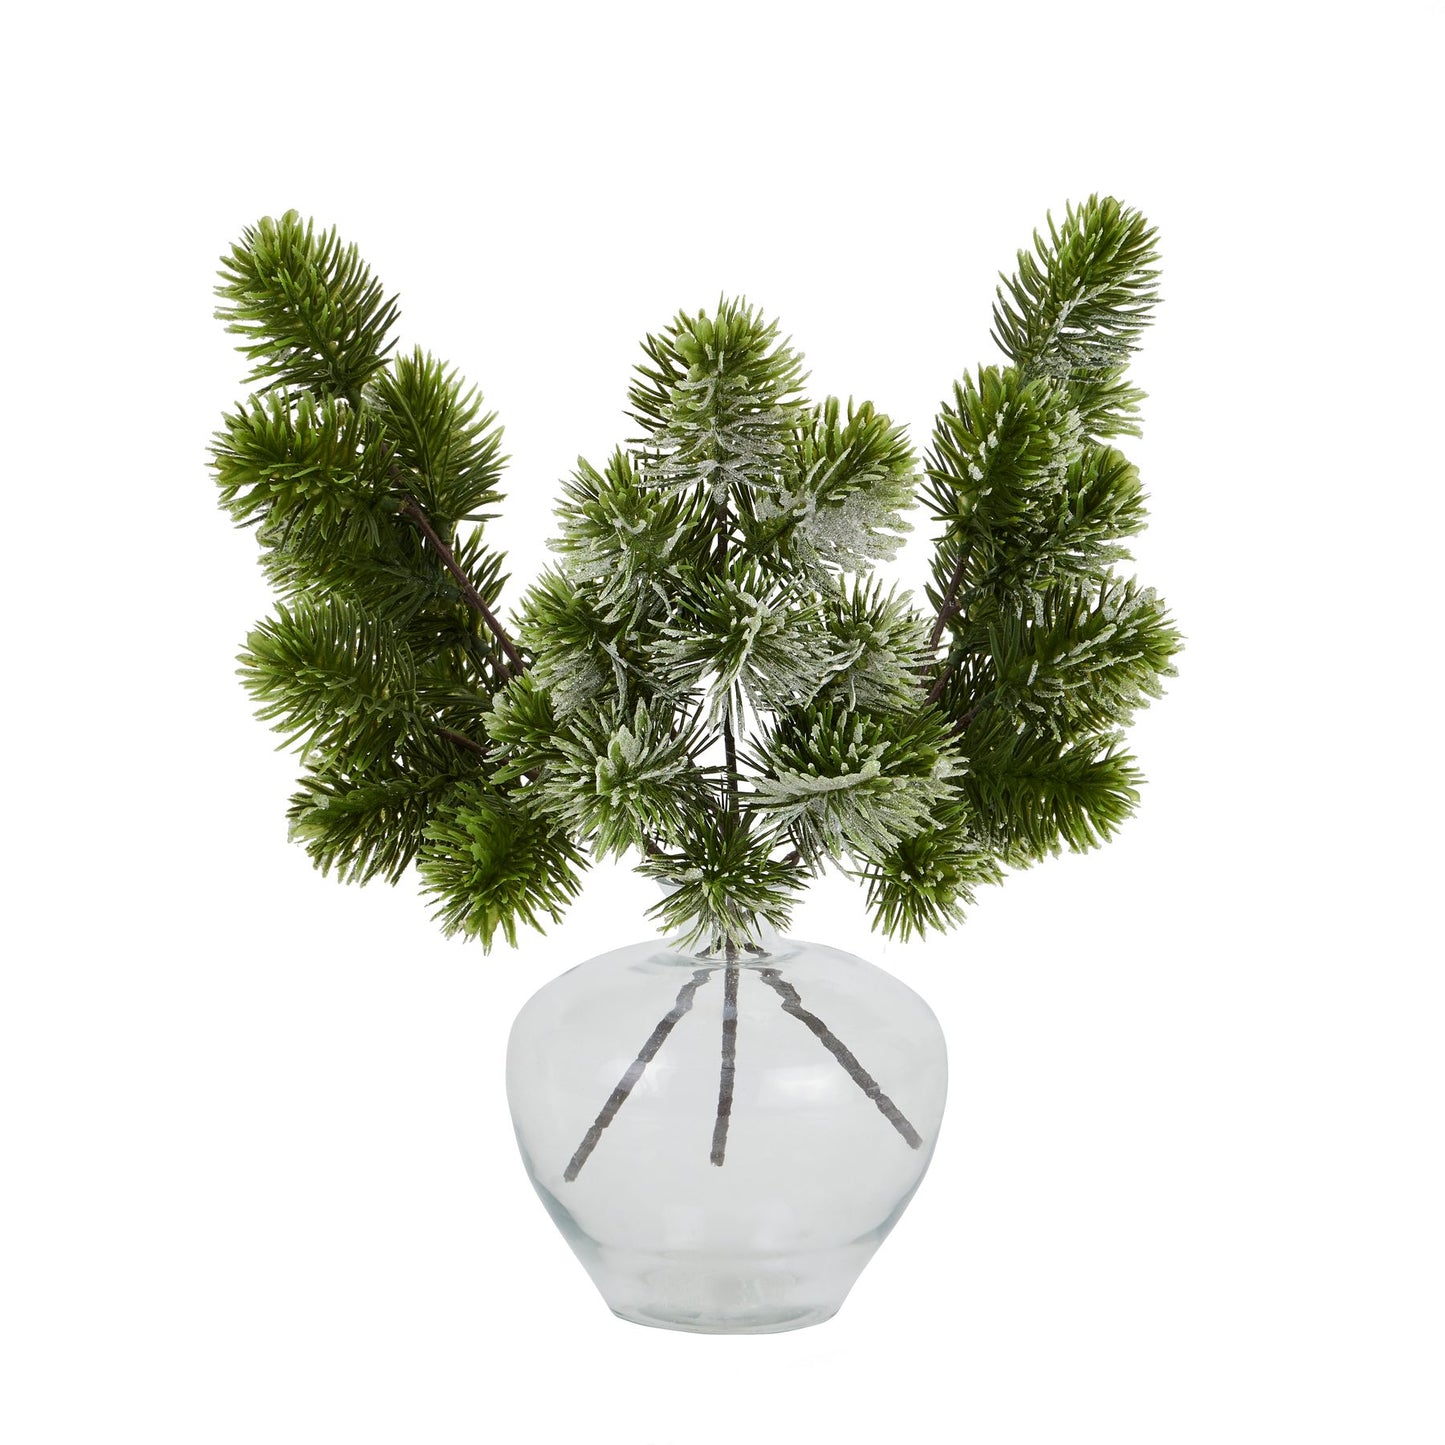 Frosted Pine Single Stem